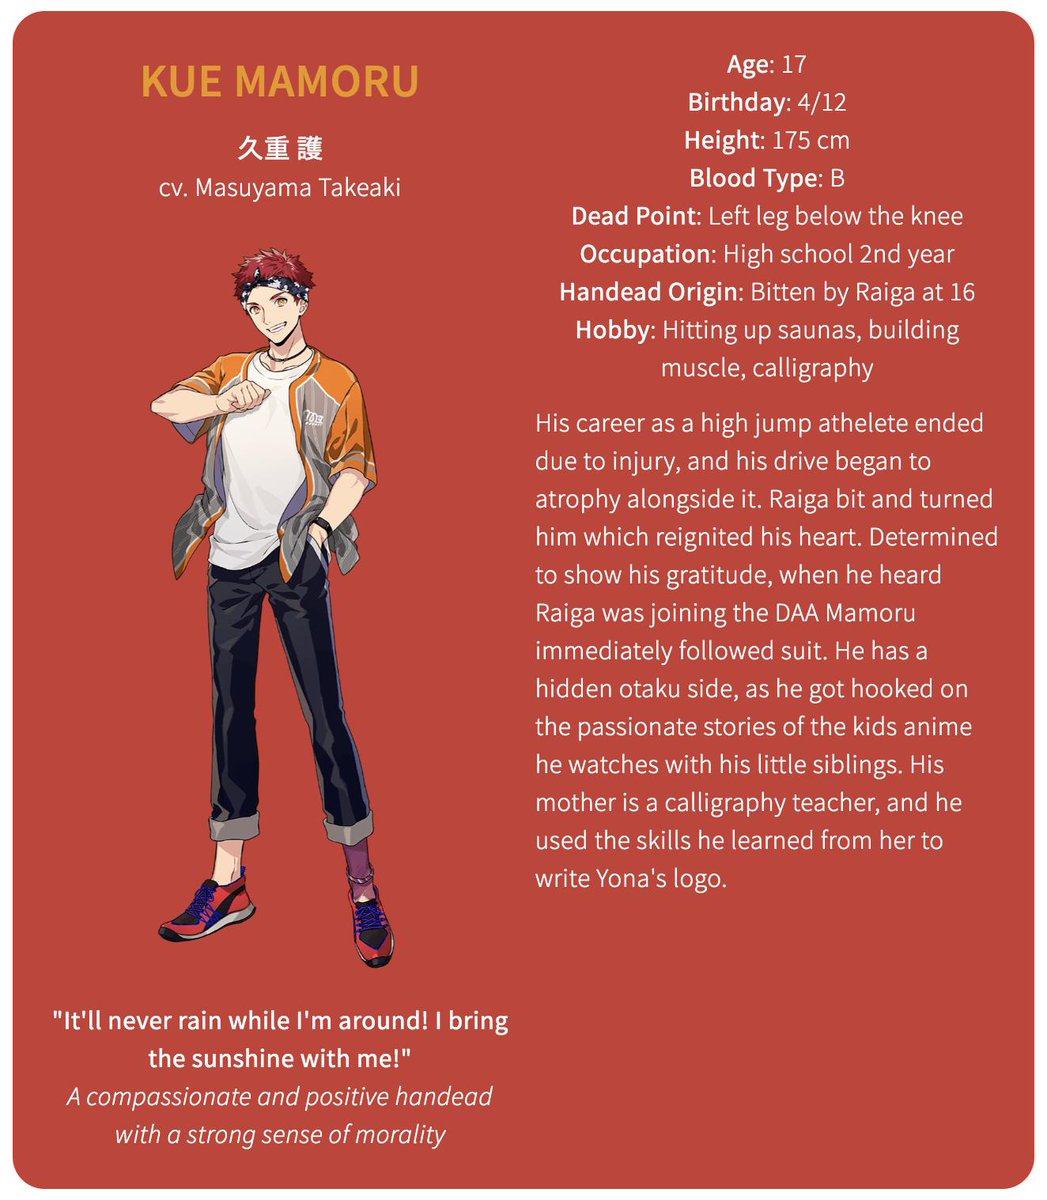 The second member of YonaKue Mamoru (cv. Masuyama Takeaki)Age: 17Birthday: 4/12Height: 175 cmBlood Type: BDead Point: Left leg below the kneeOccupation: High school 2nd yearHandead Origin: Bitten by Raiga at 16Hobby: Hitting up saunas, building muscle, calligraphy